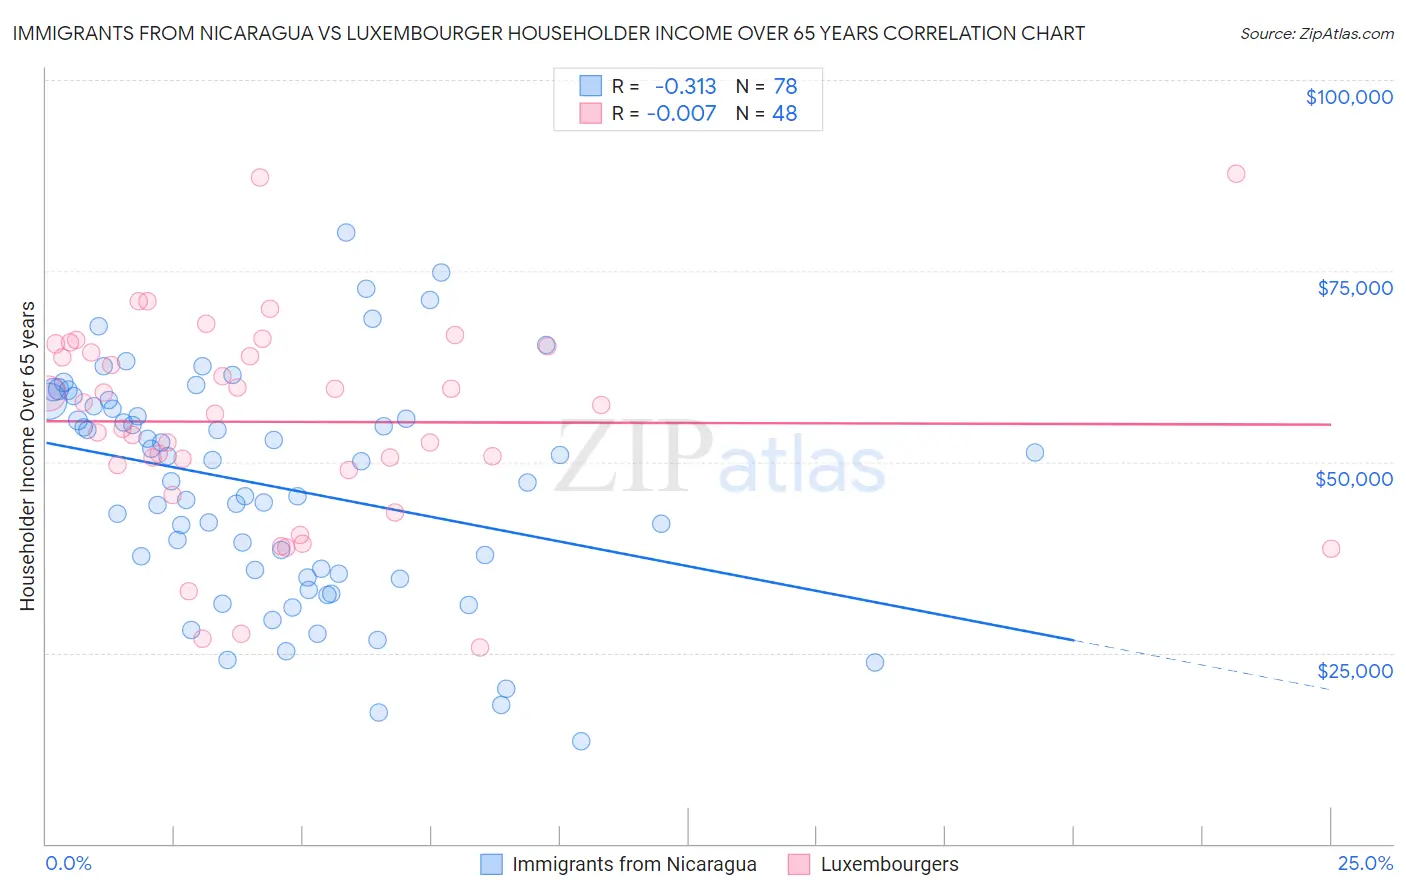 Immigrants from Nicaragua vs Luxembourger Householder Income Over 65 years